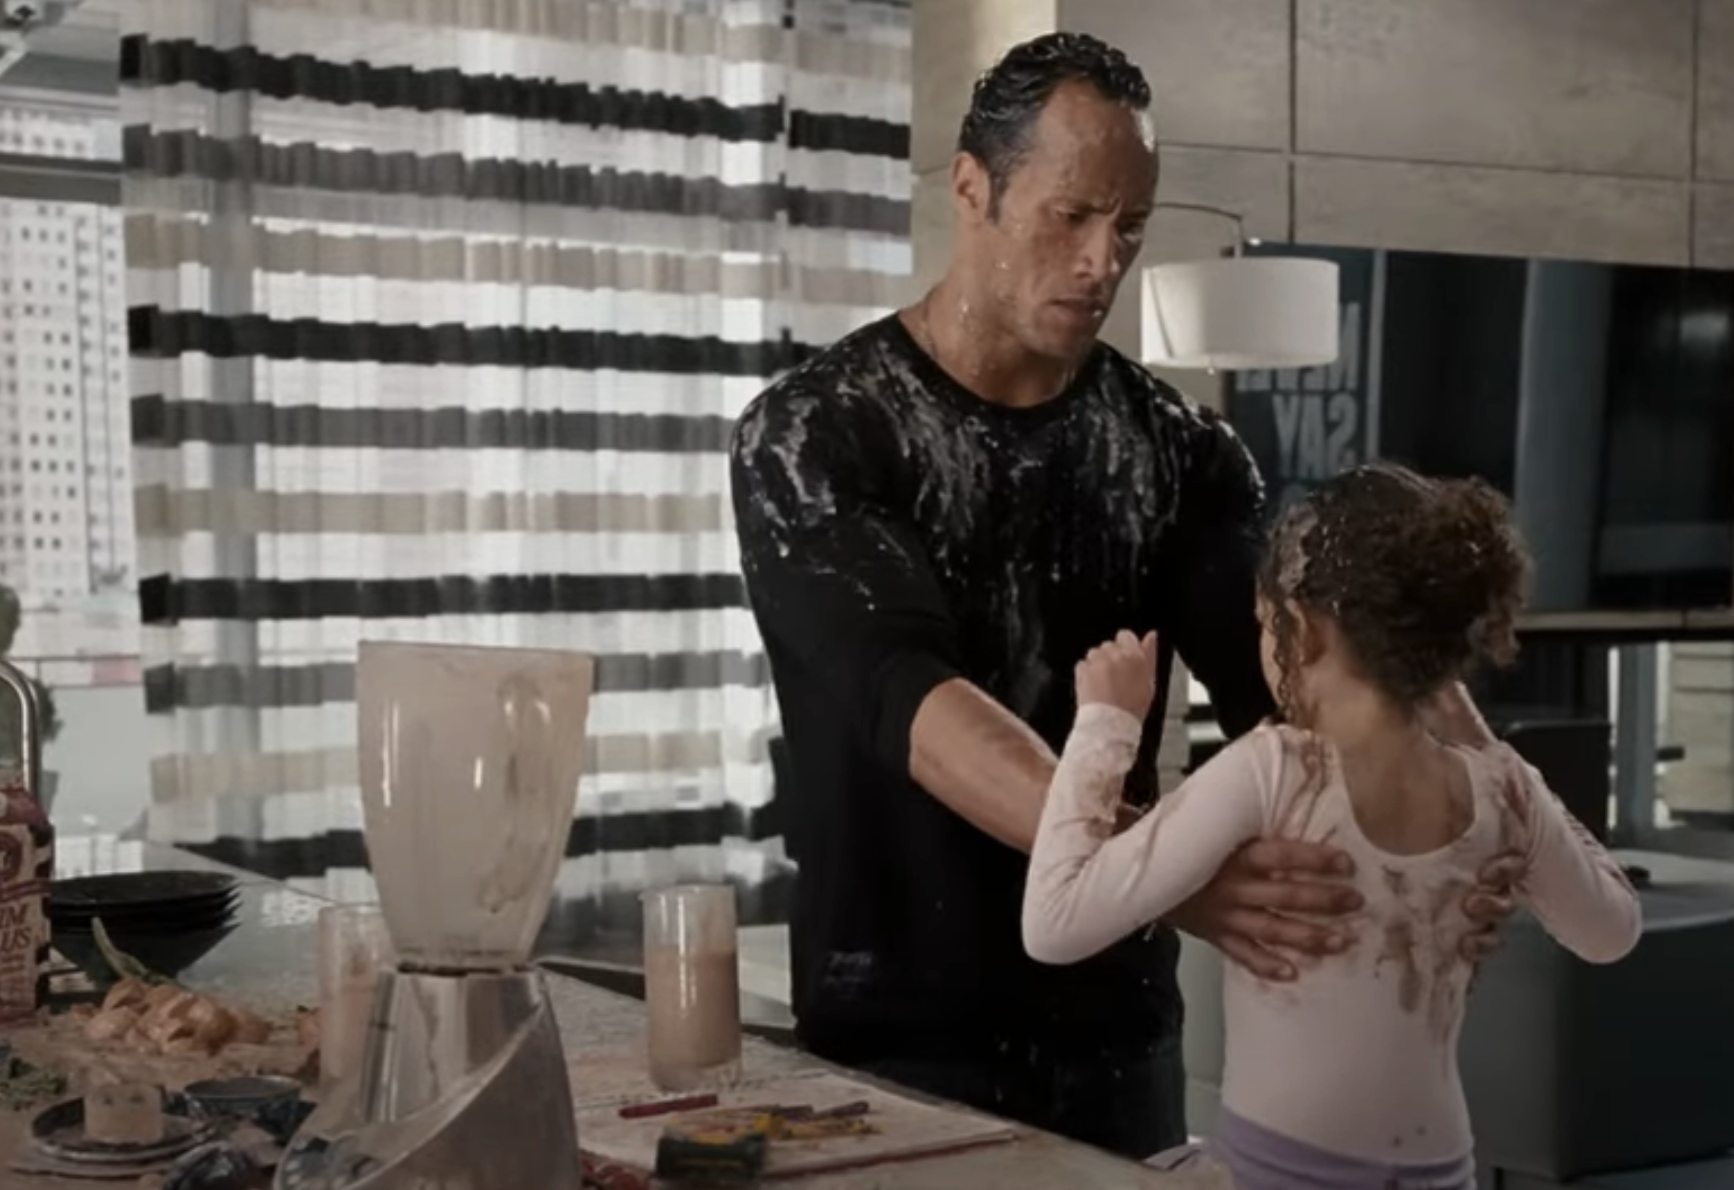 Dwayne Johnson and a young girl in a messy kitchen with splattered food, portraying a playful and chaotic cooking scene